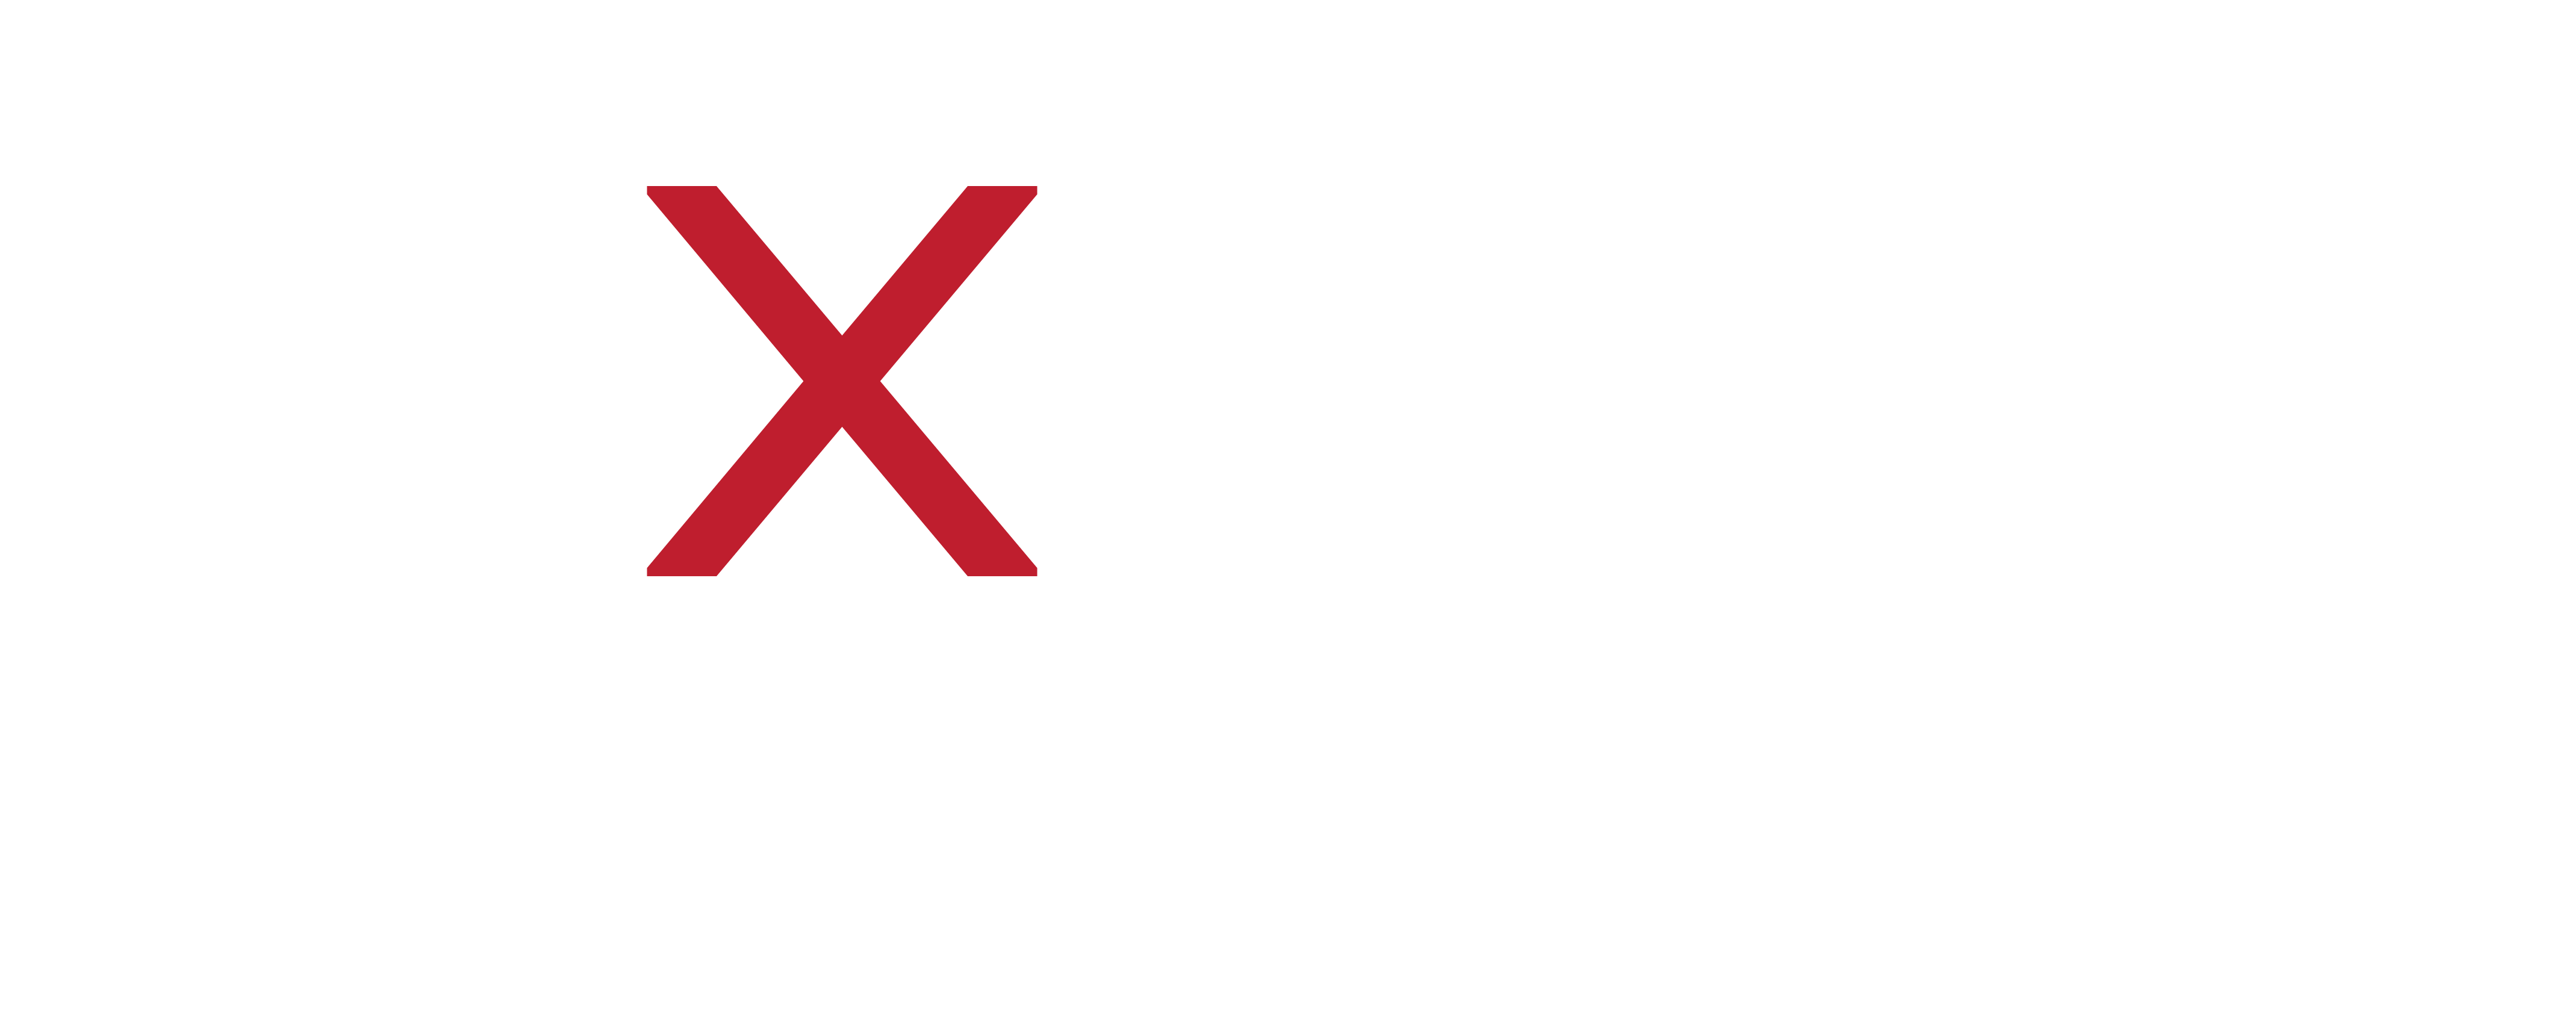 Exyst